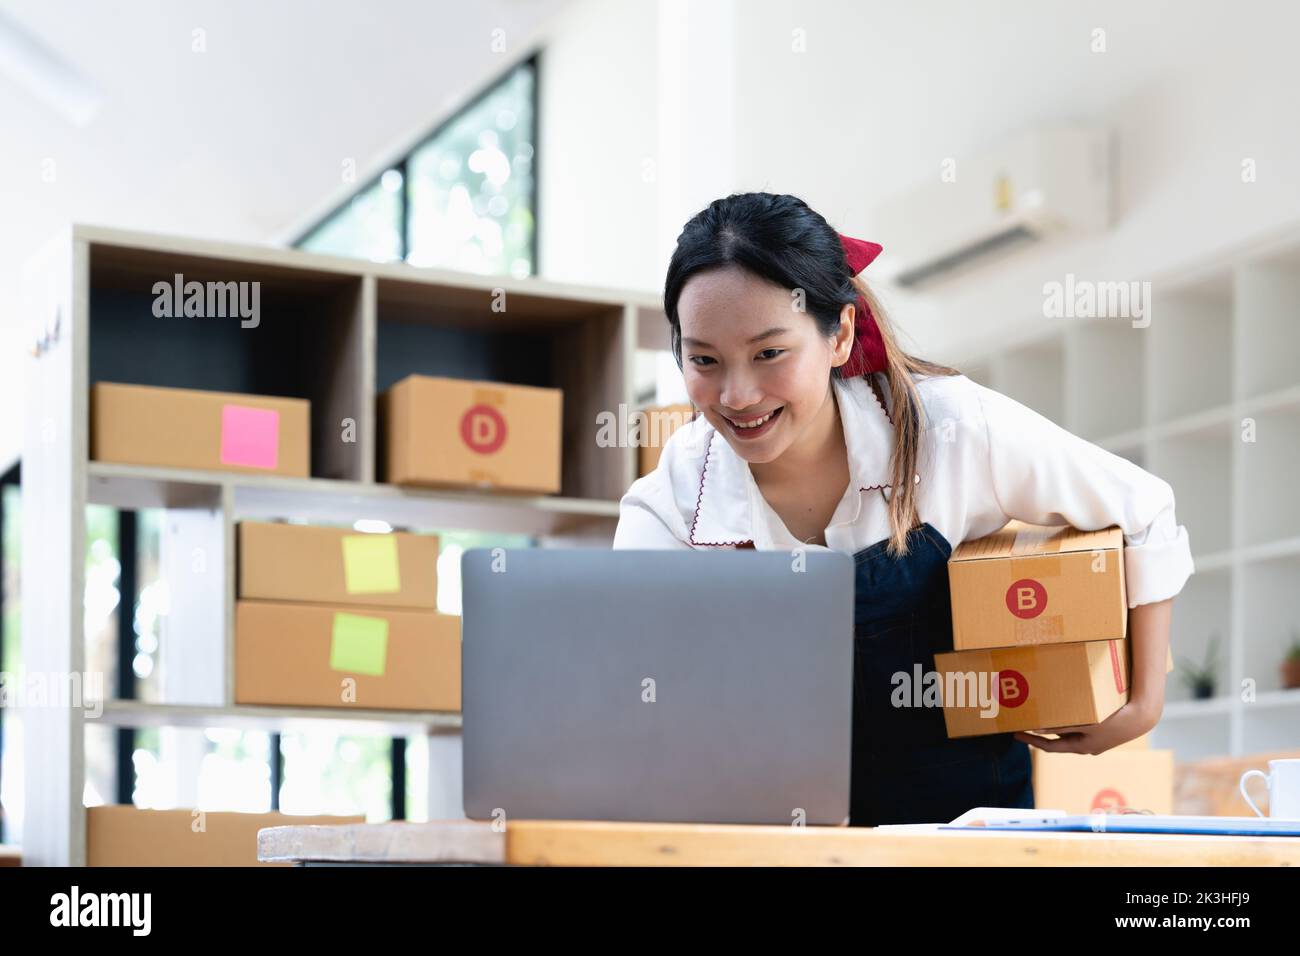 Startup small business entrepreneur SME freelance woman working with box, Young asian online market packing box delivery, SME delivery e-commerce Stock Photo